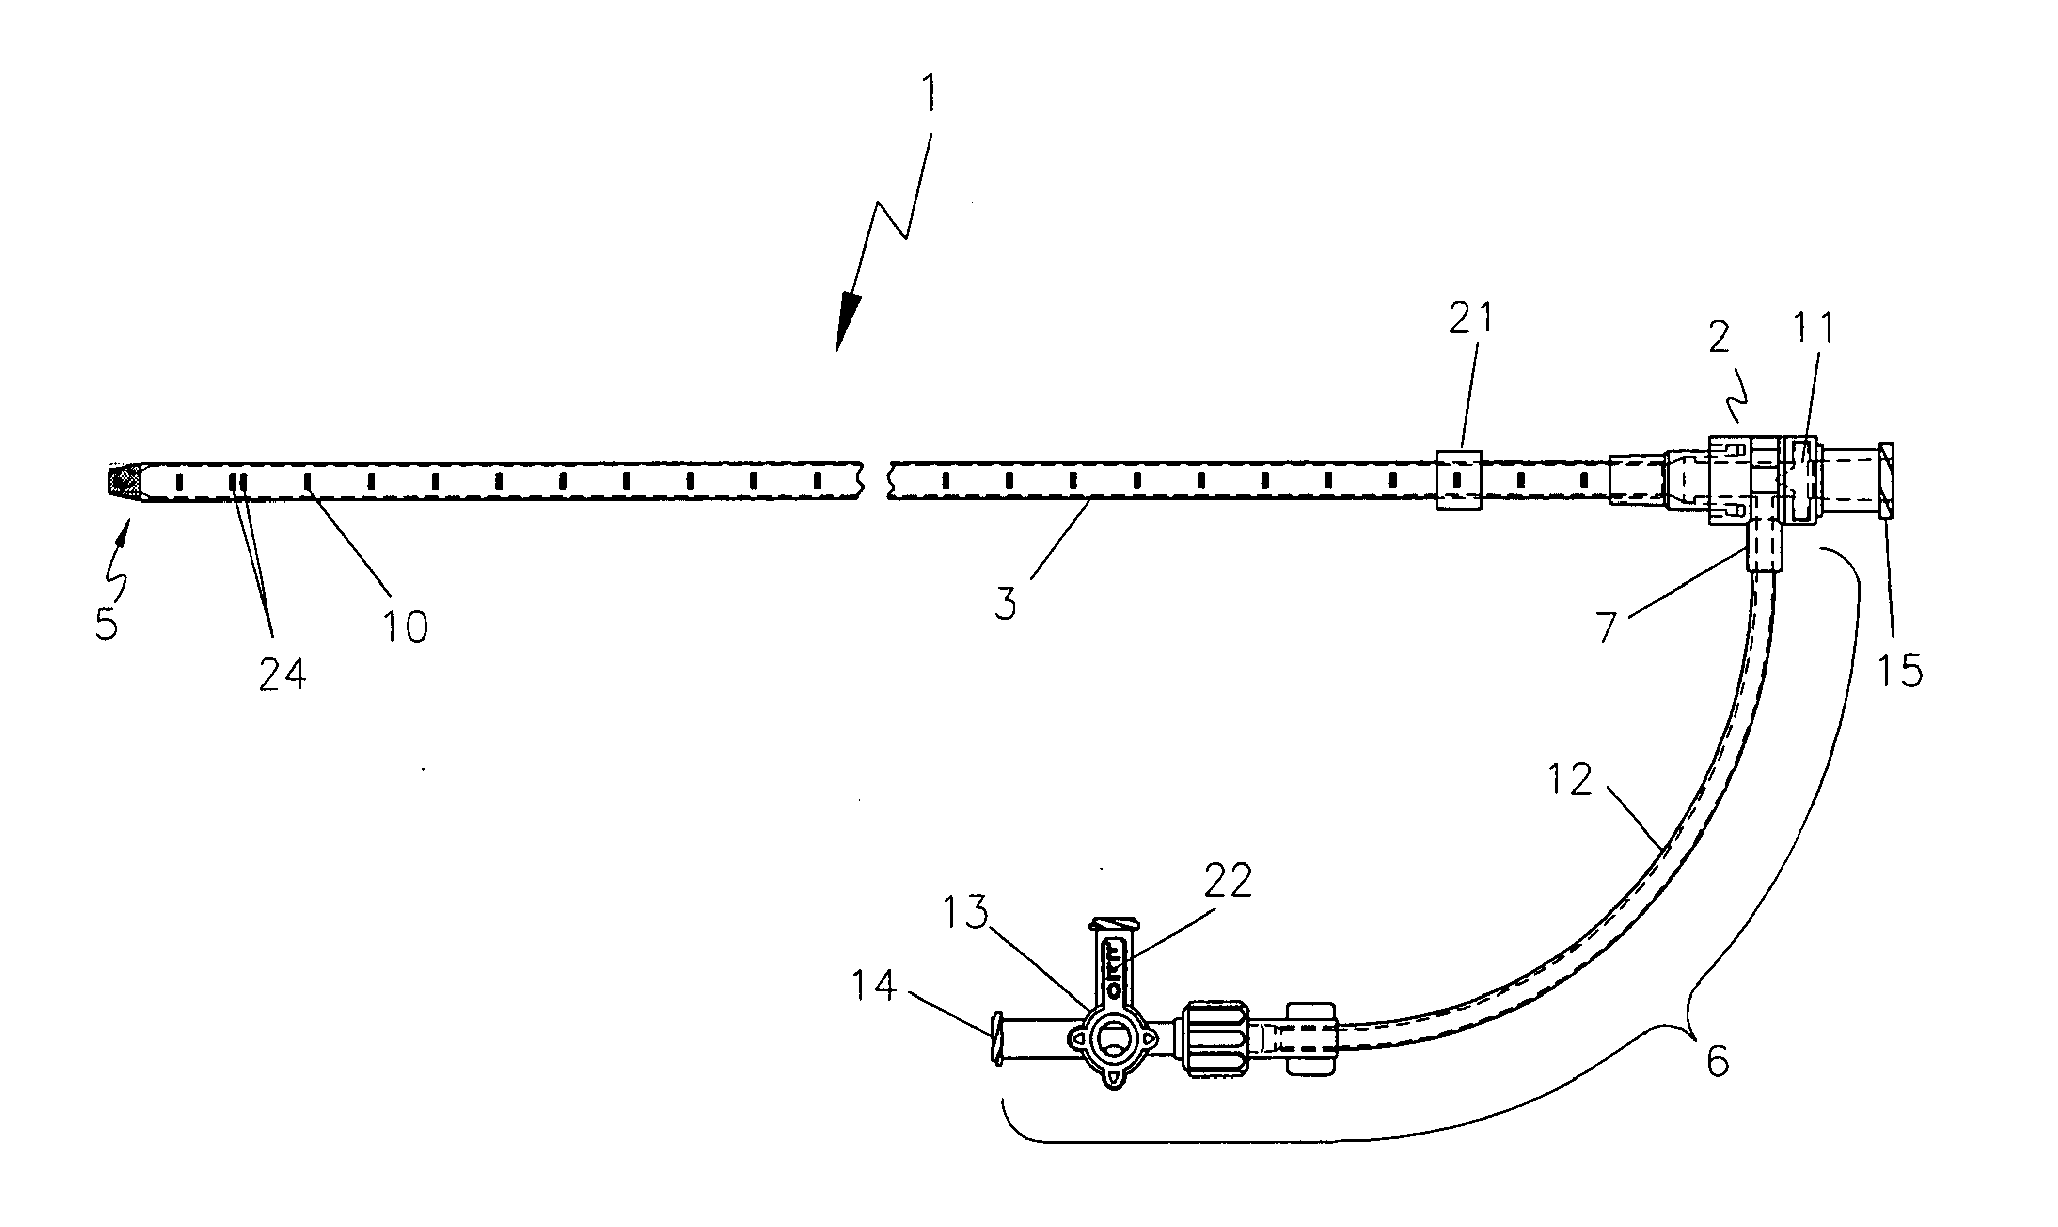 Endovascular Treatment Apparatus and Method